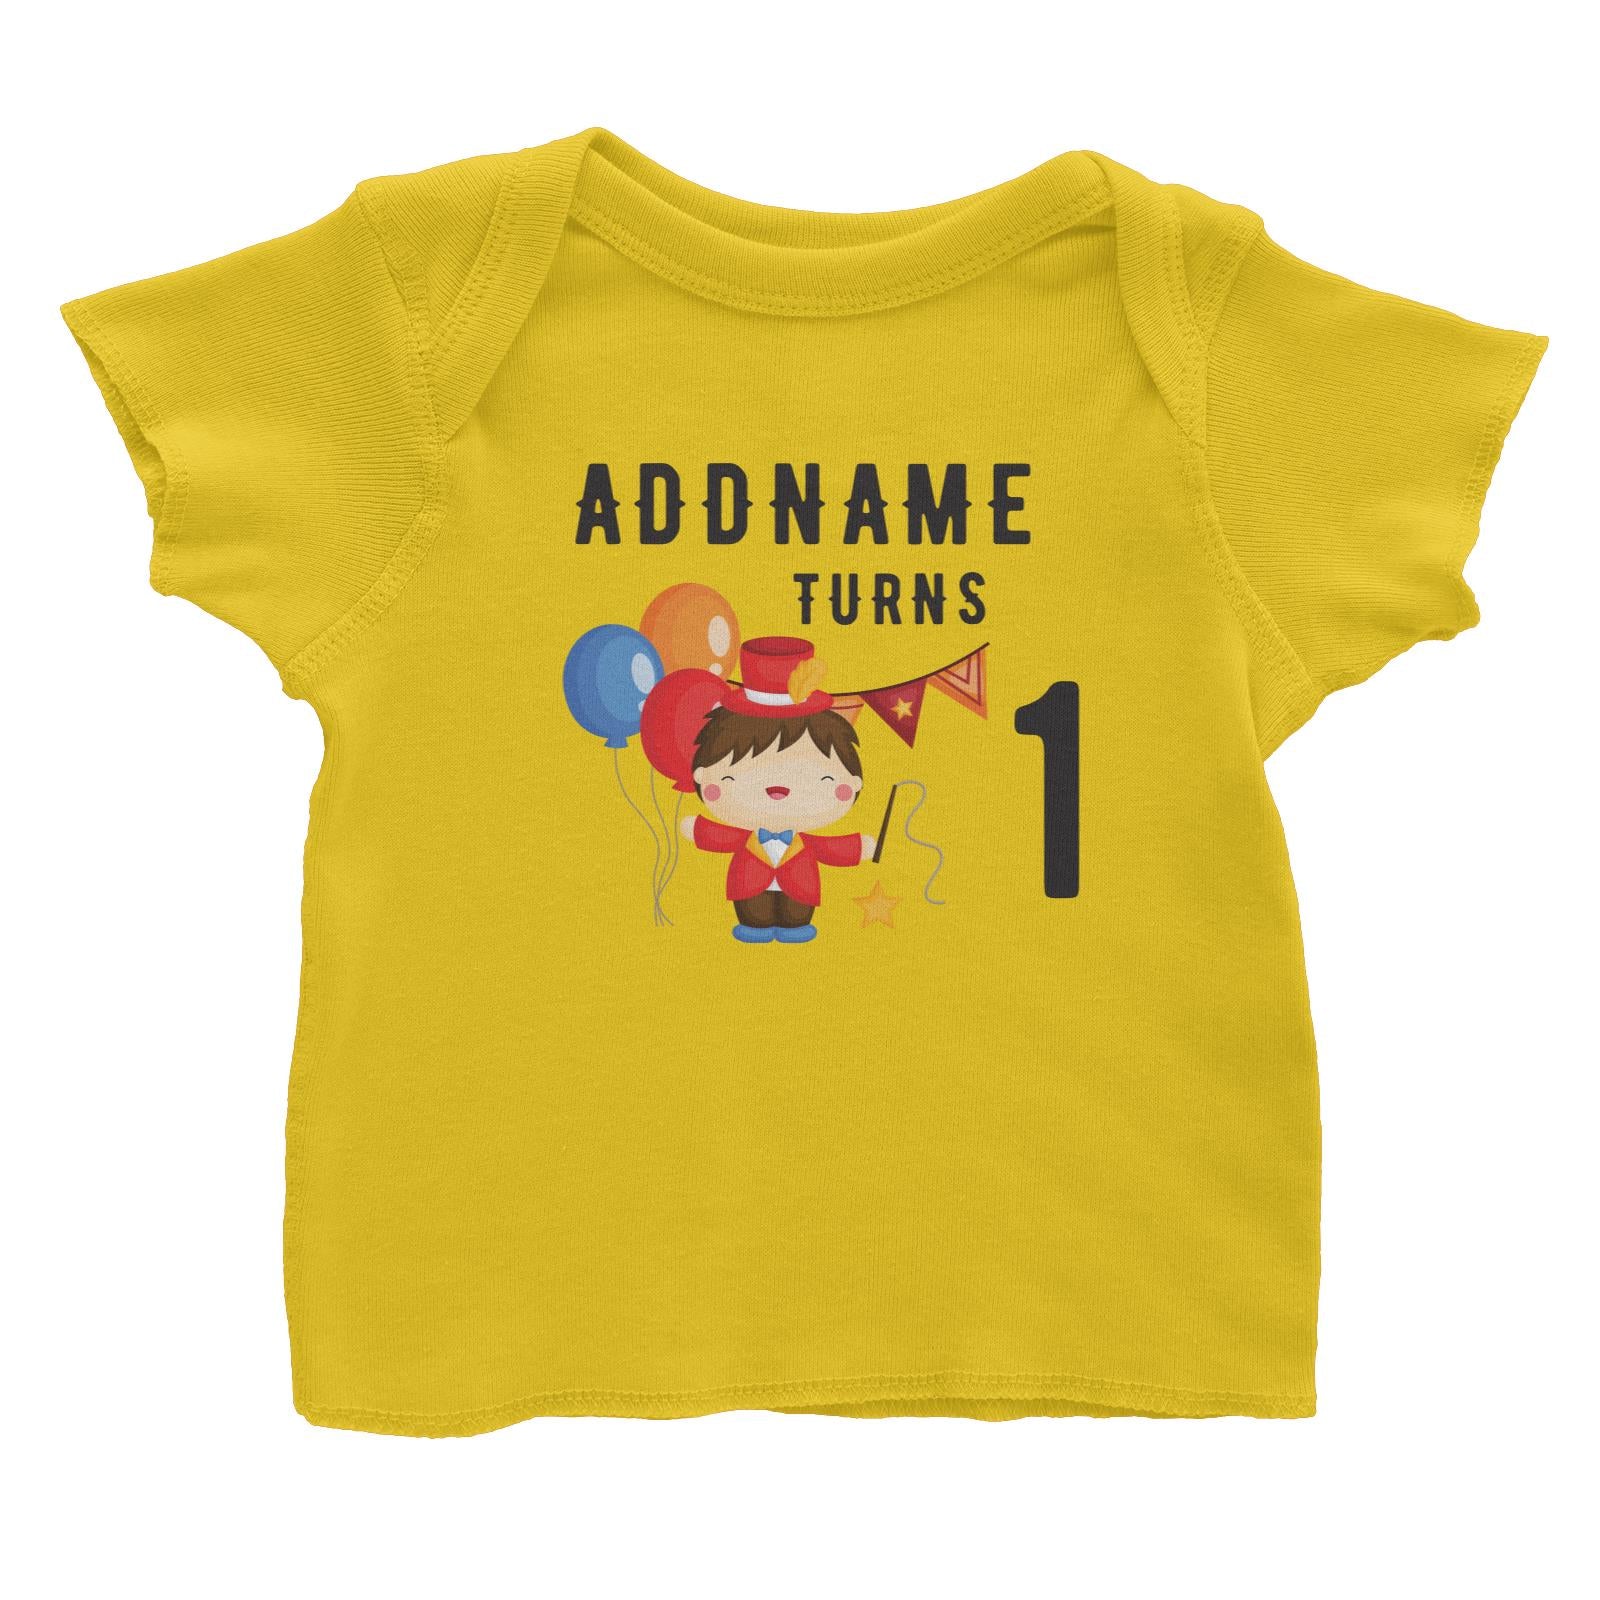 Birthday Circus Happy Boy Leader of Performance Addname Turns 1 Baby T-Shirt